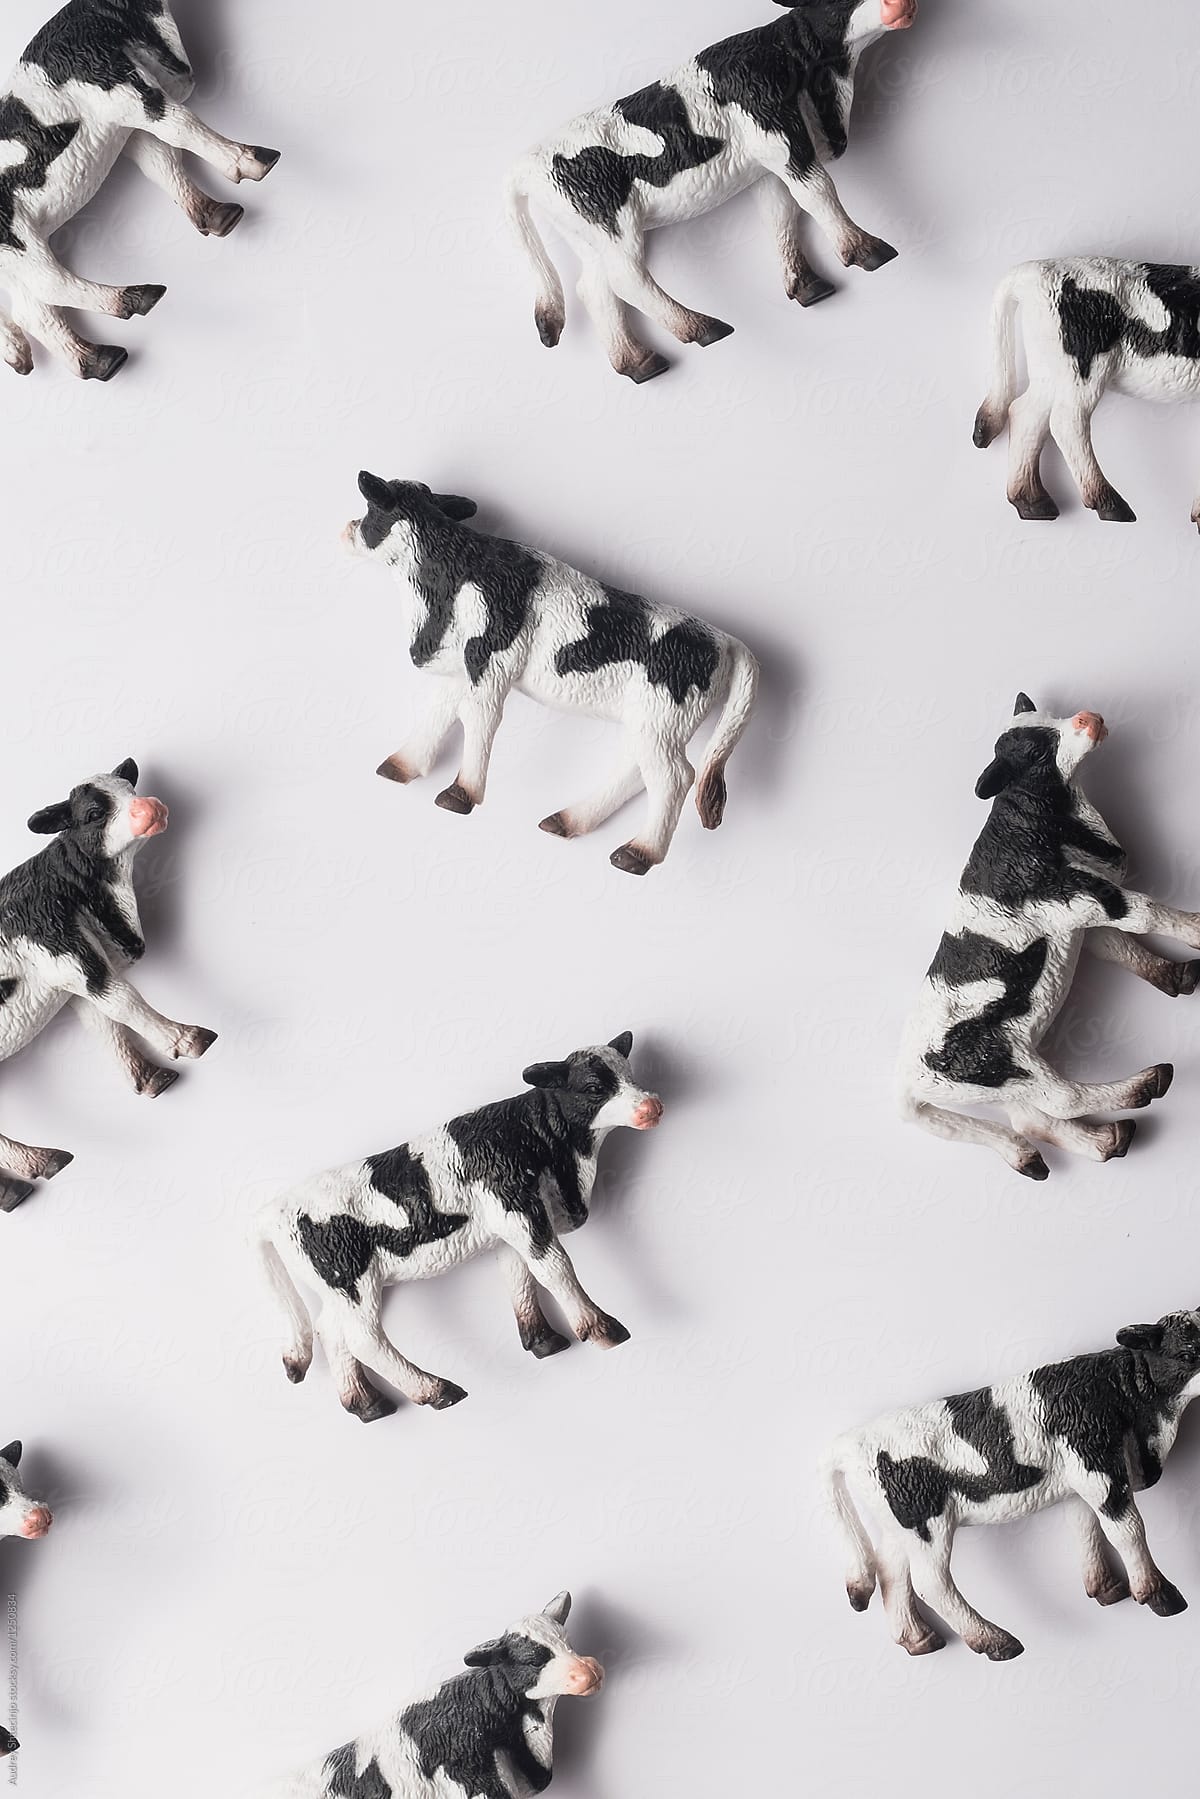 Miniature of cows on white background.